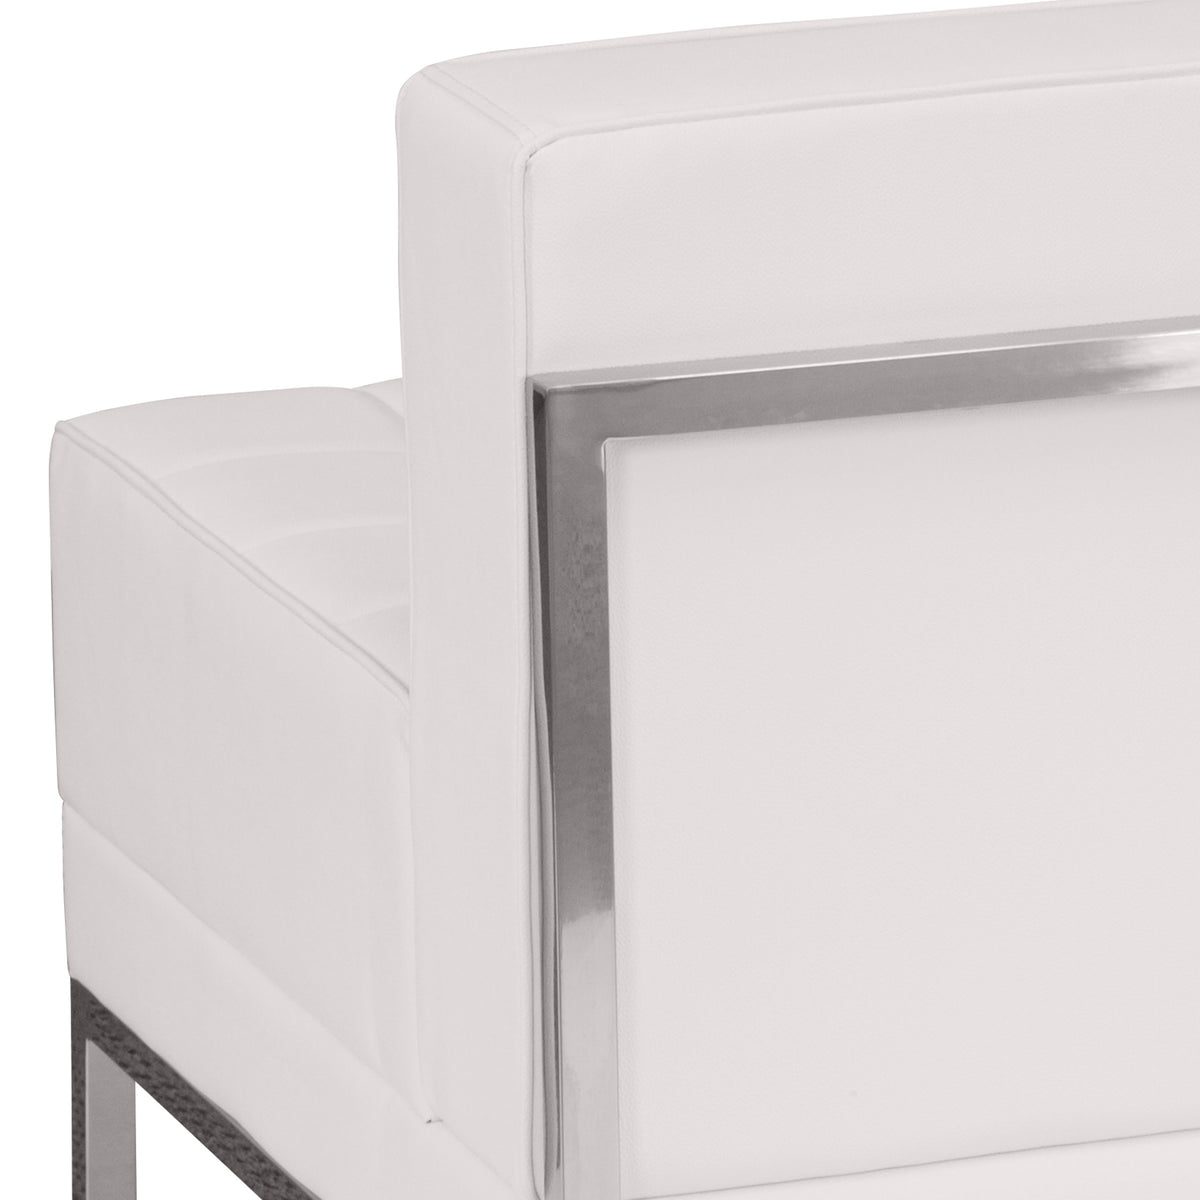 Melrose White |#| Contemporary White LeatherSoft Middle Chair - Reception &Home Office Chair